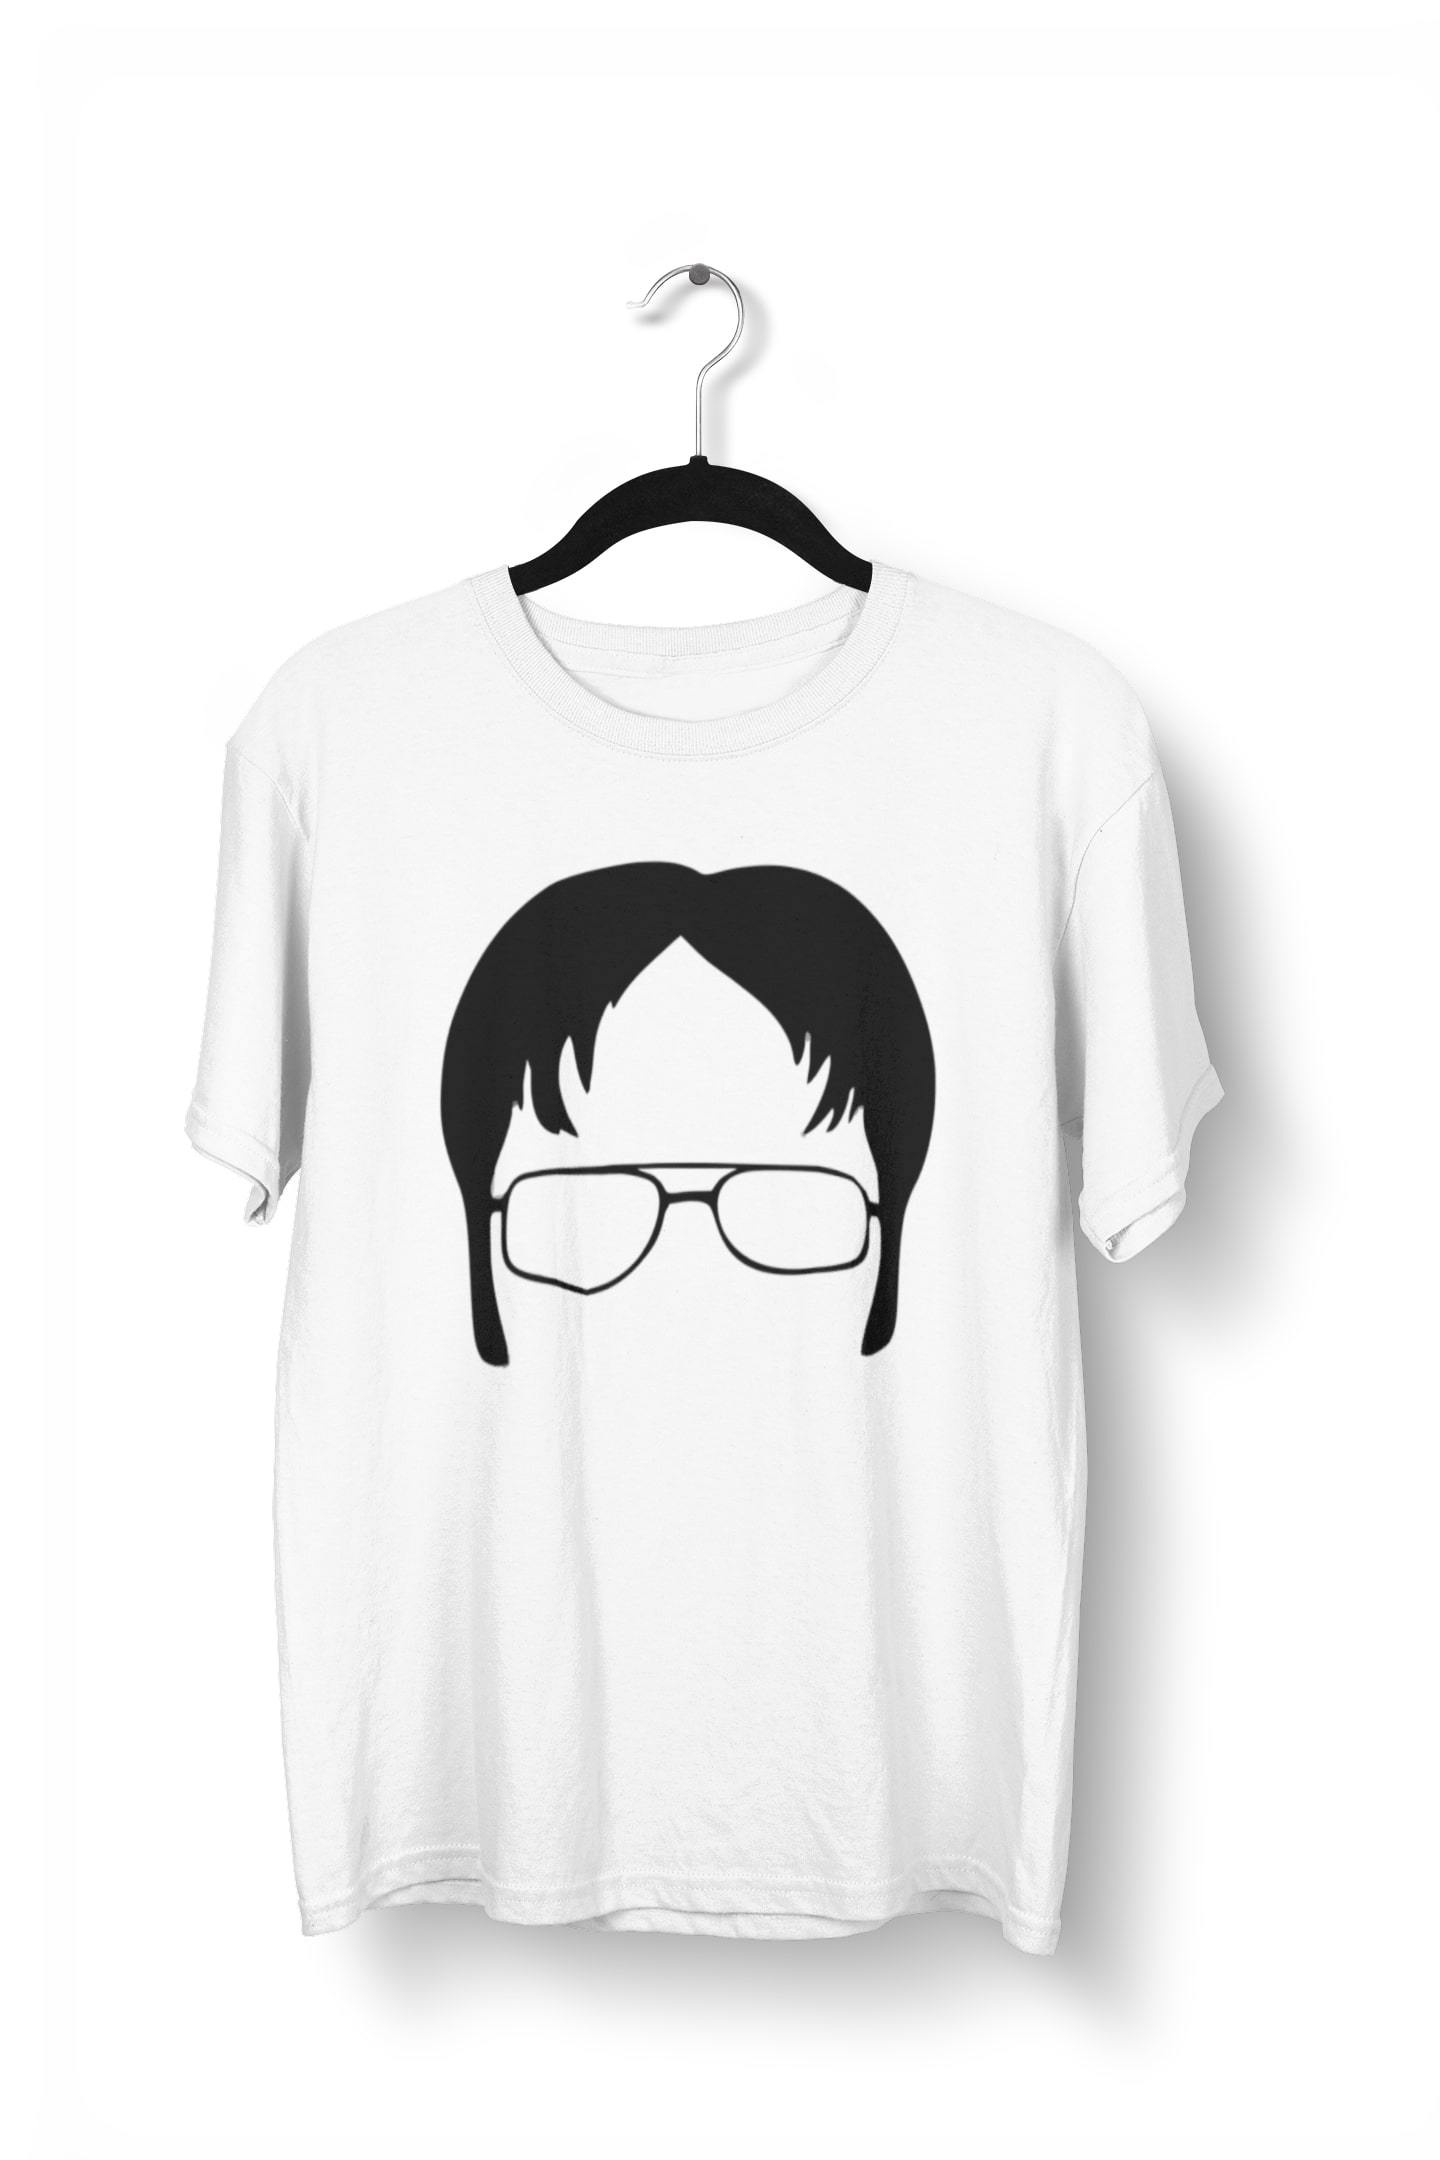 thelegalgang,Dwight Shrute The Office T-Shirt,.